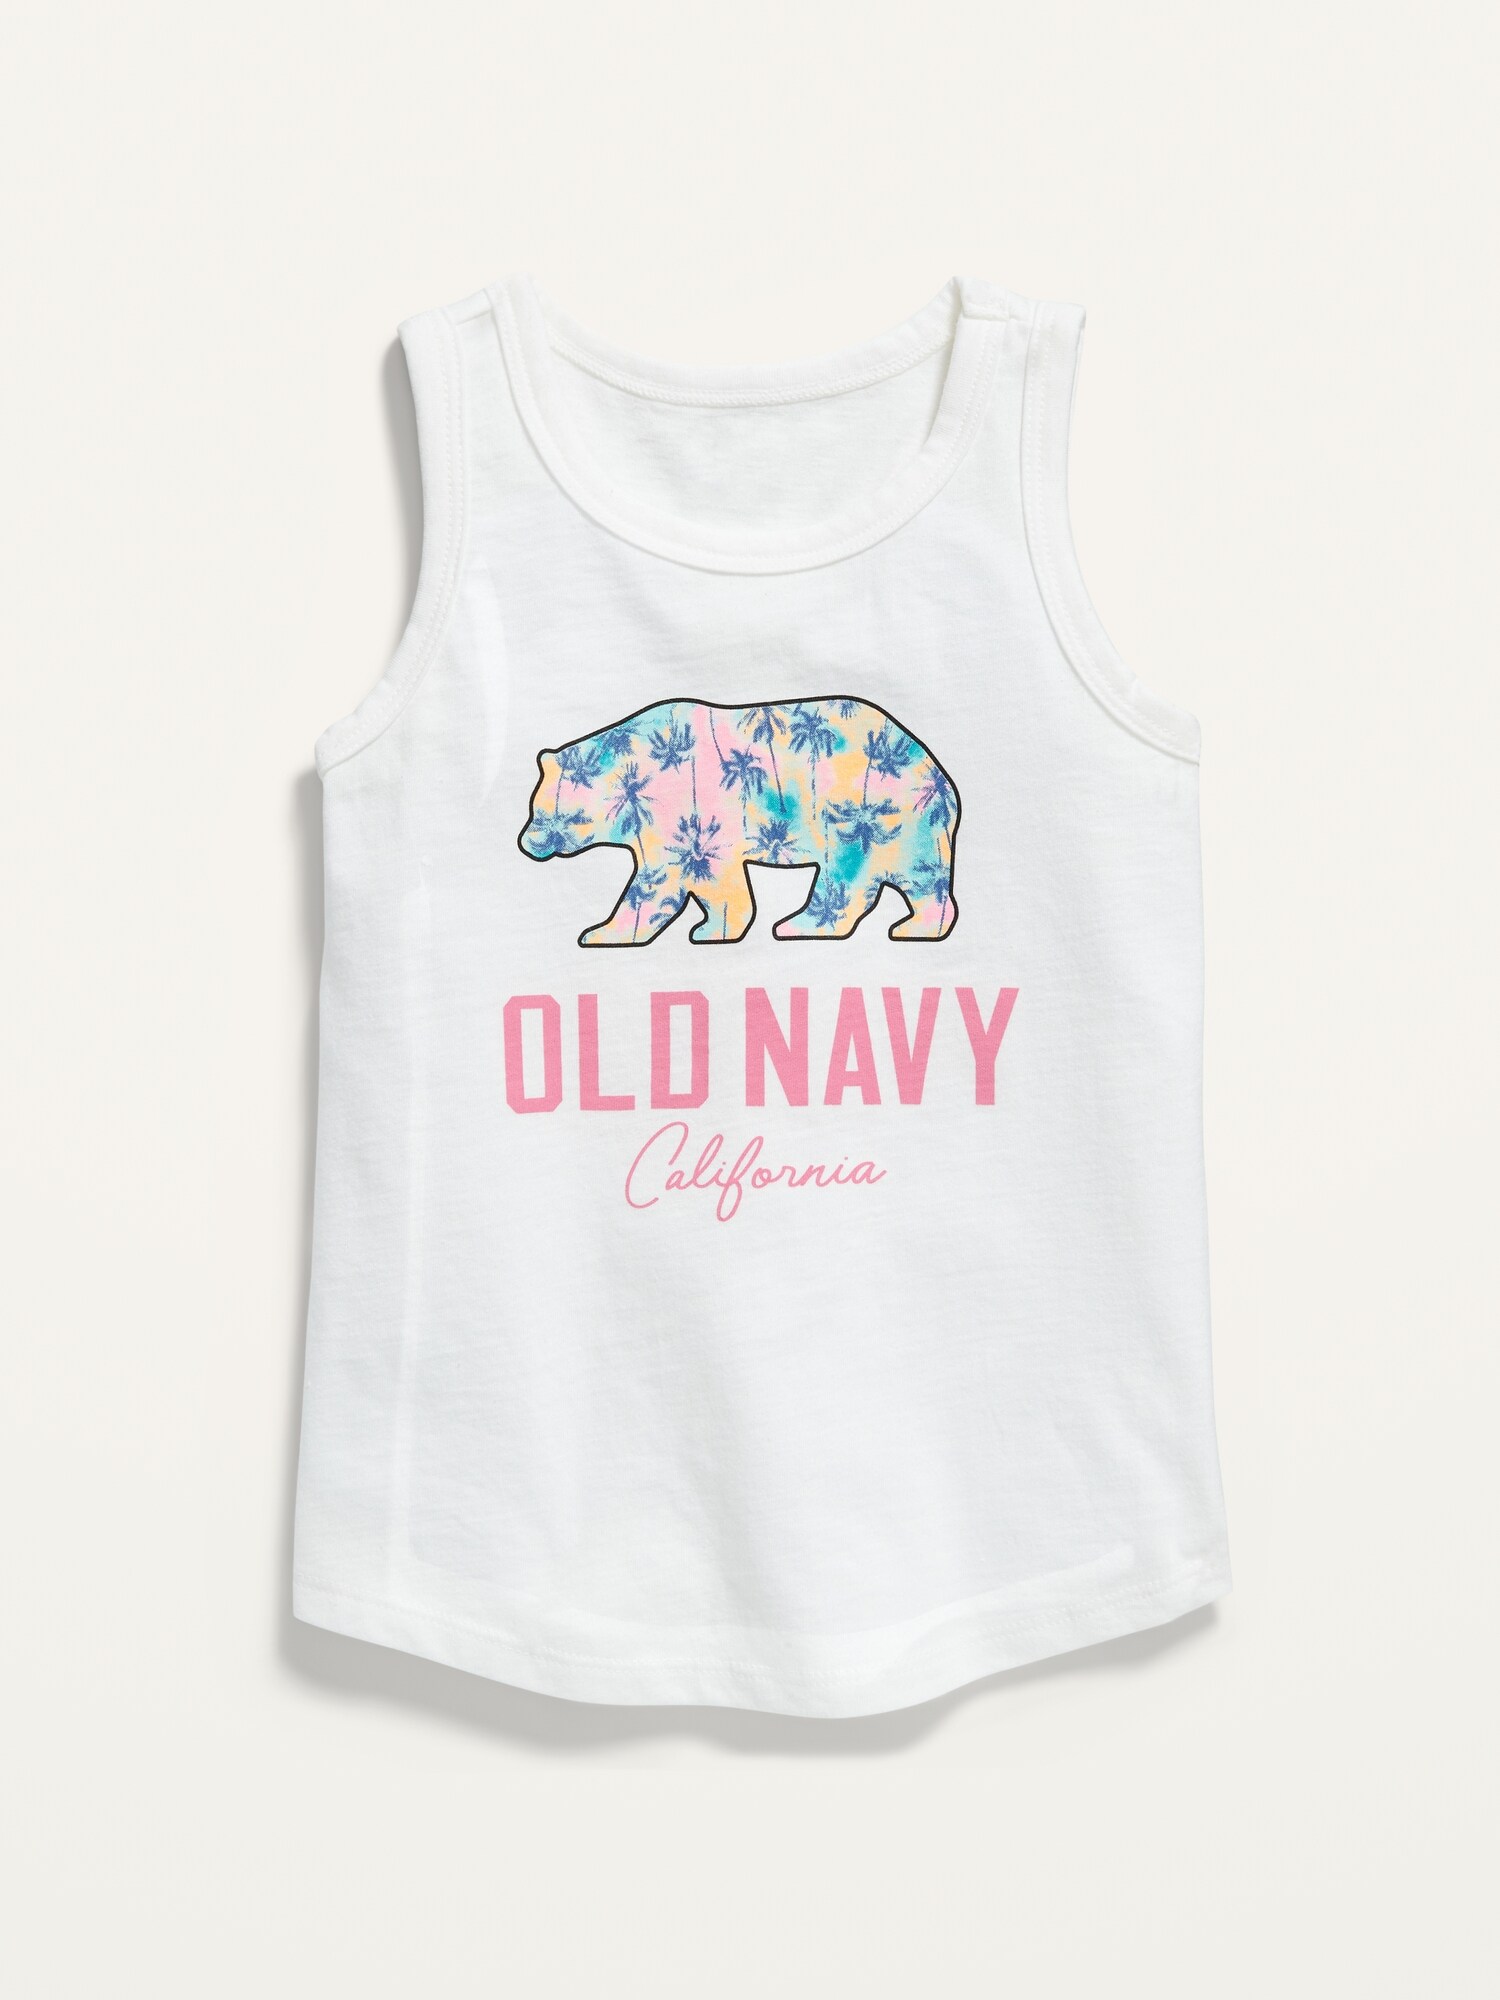 Unisex Logo-Graphic Tank Top for Toddler